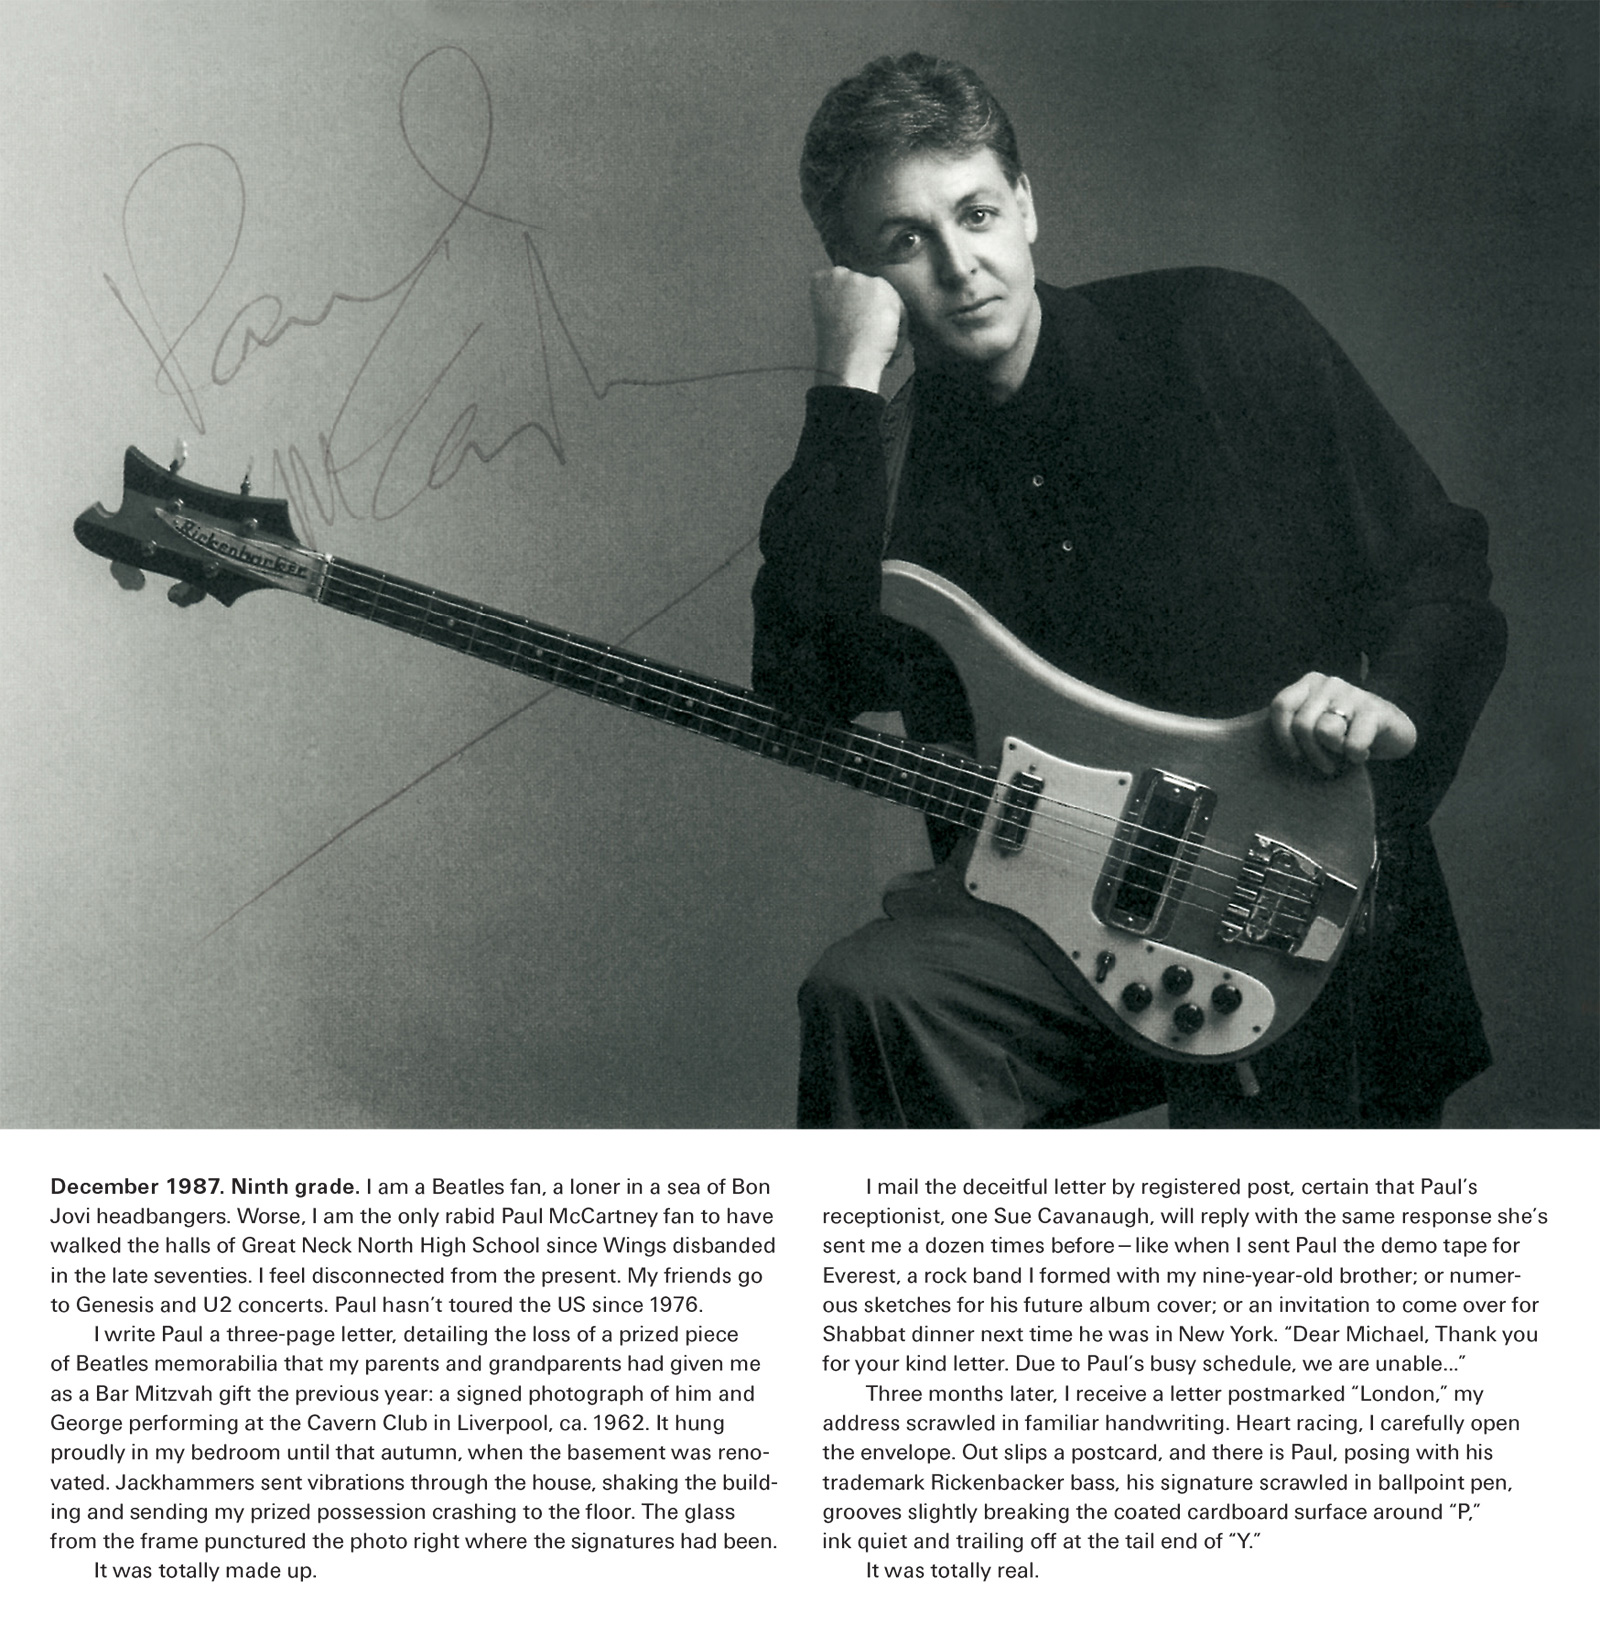 A 2005 postcard project by Michael Rakowitz titled “Yours Sincerely, Wasting Away: A Letter from Paul.” It depicts a photograph of Paul McCartney, which was featured on the front of a signed postcard Rakowitz received in 1987 from the singer. The accompanying caption recounts the story of how Rakowitz duped McCartney into sending him the postcard.